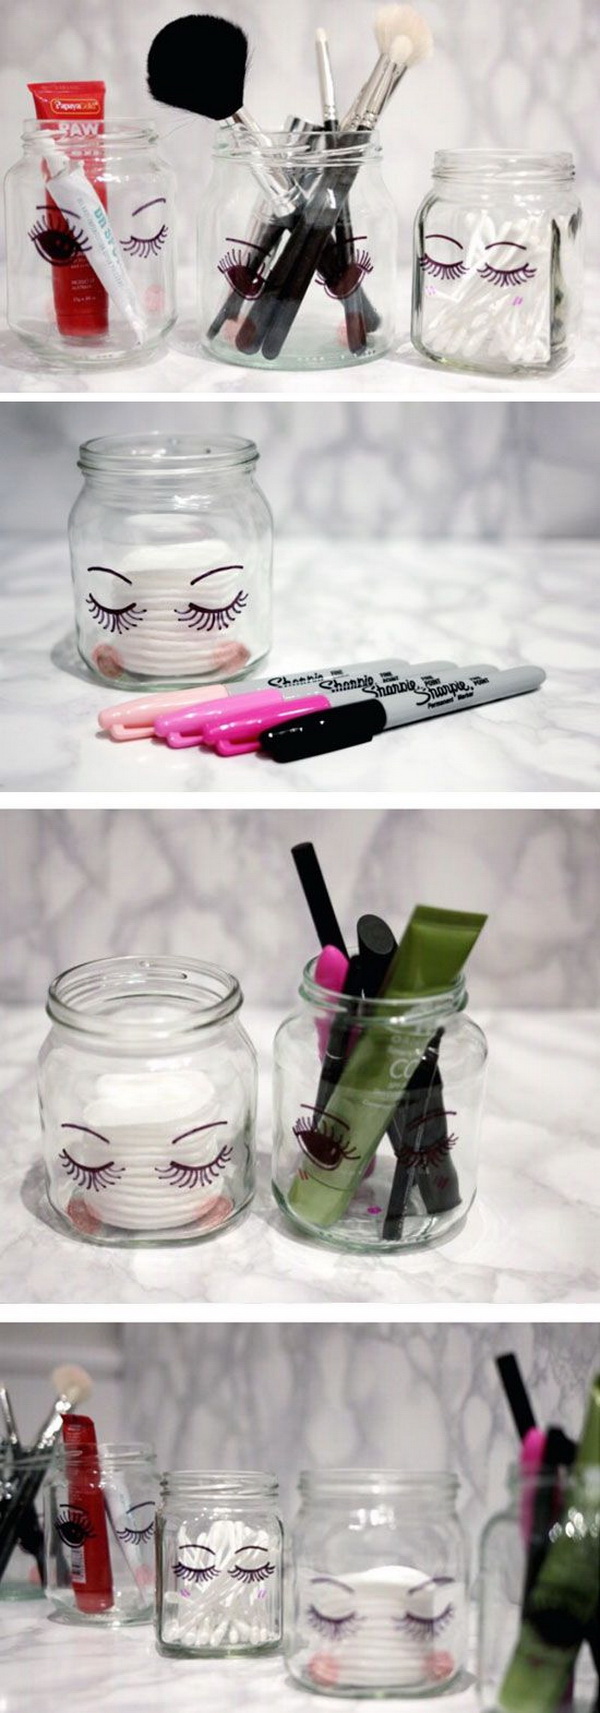 DIY Sharpie Make Up Storage Jars. These sharpie jars look super cute in their simplicity when place in your bathroom or vanity. Super easy, fun and quick to make in several minutes. 